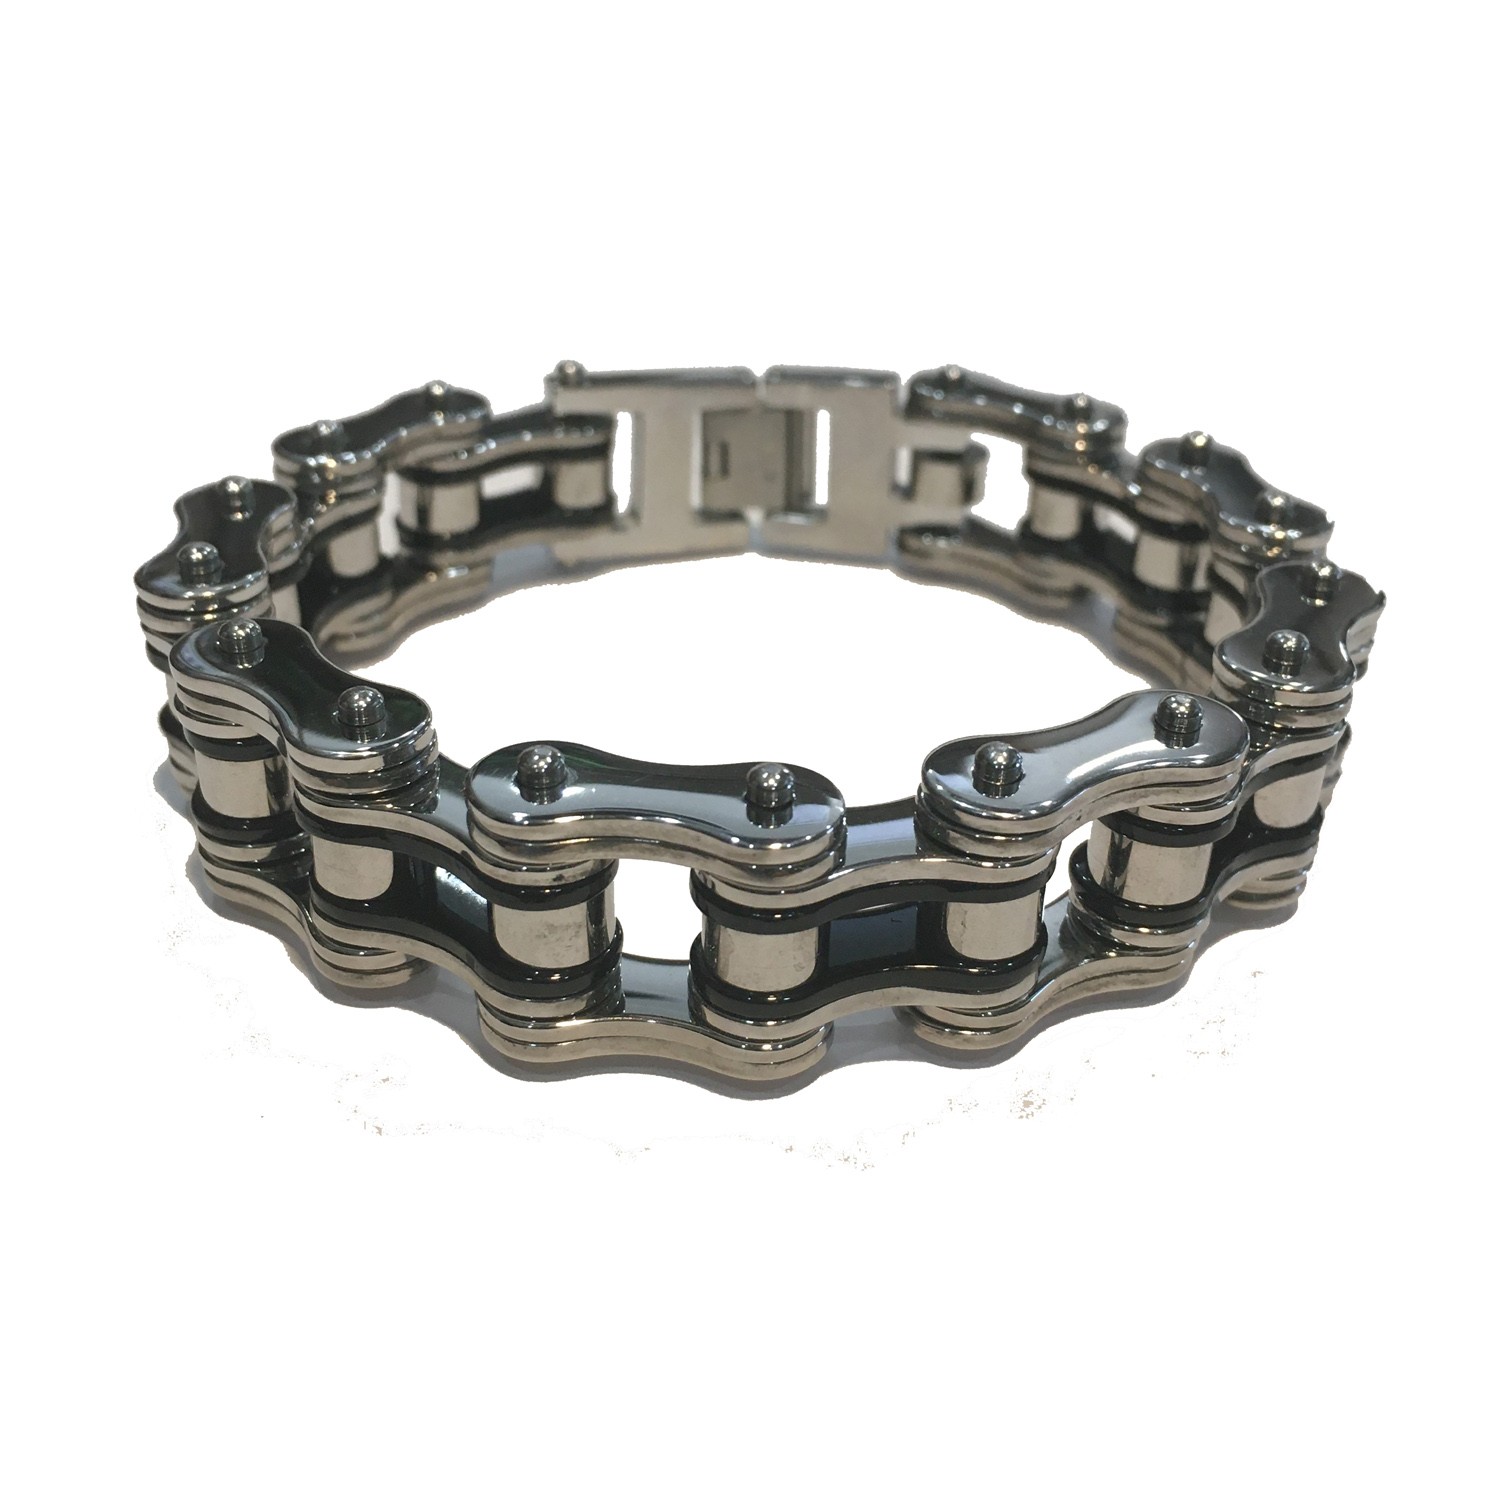 SHINY SILVER & BLACK MENS MOTORCYCLE CHAIN BRACELET STAINLESS STEEL 9